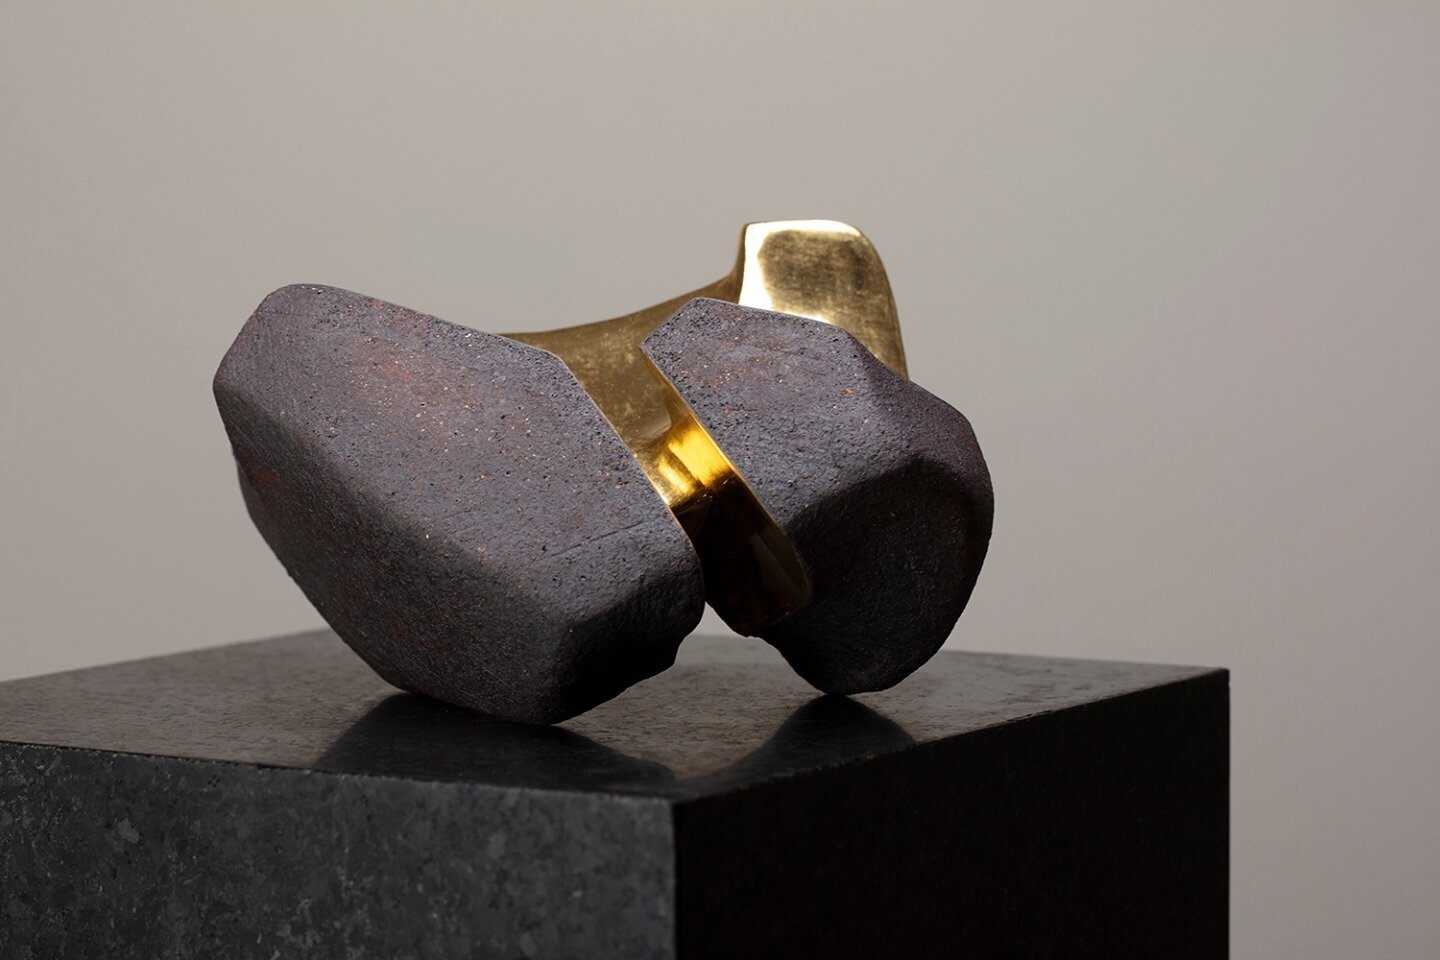 &ldquo;Untitled&rdquo;, solid clay, gold-plated, sculpture by Jorge Y&aacute;zpik, presented at Este Arte Uruguay online edition, in our display 'Volume vs Void'. Jorge Y&aacute;zpik&rsquo;s sculptures notably play with volume and negative space. As 